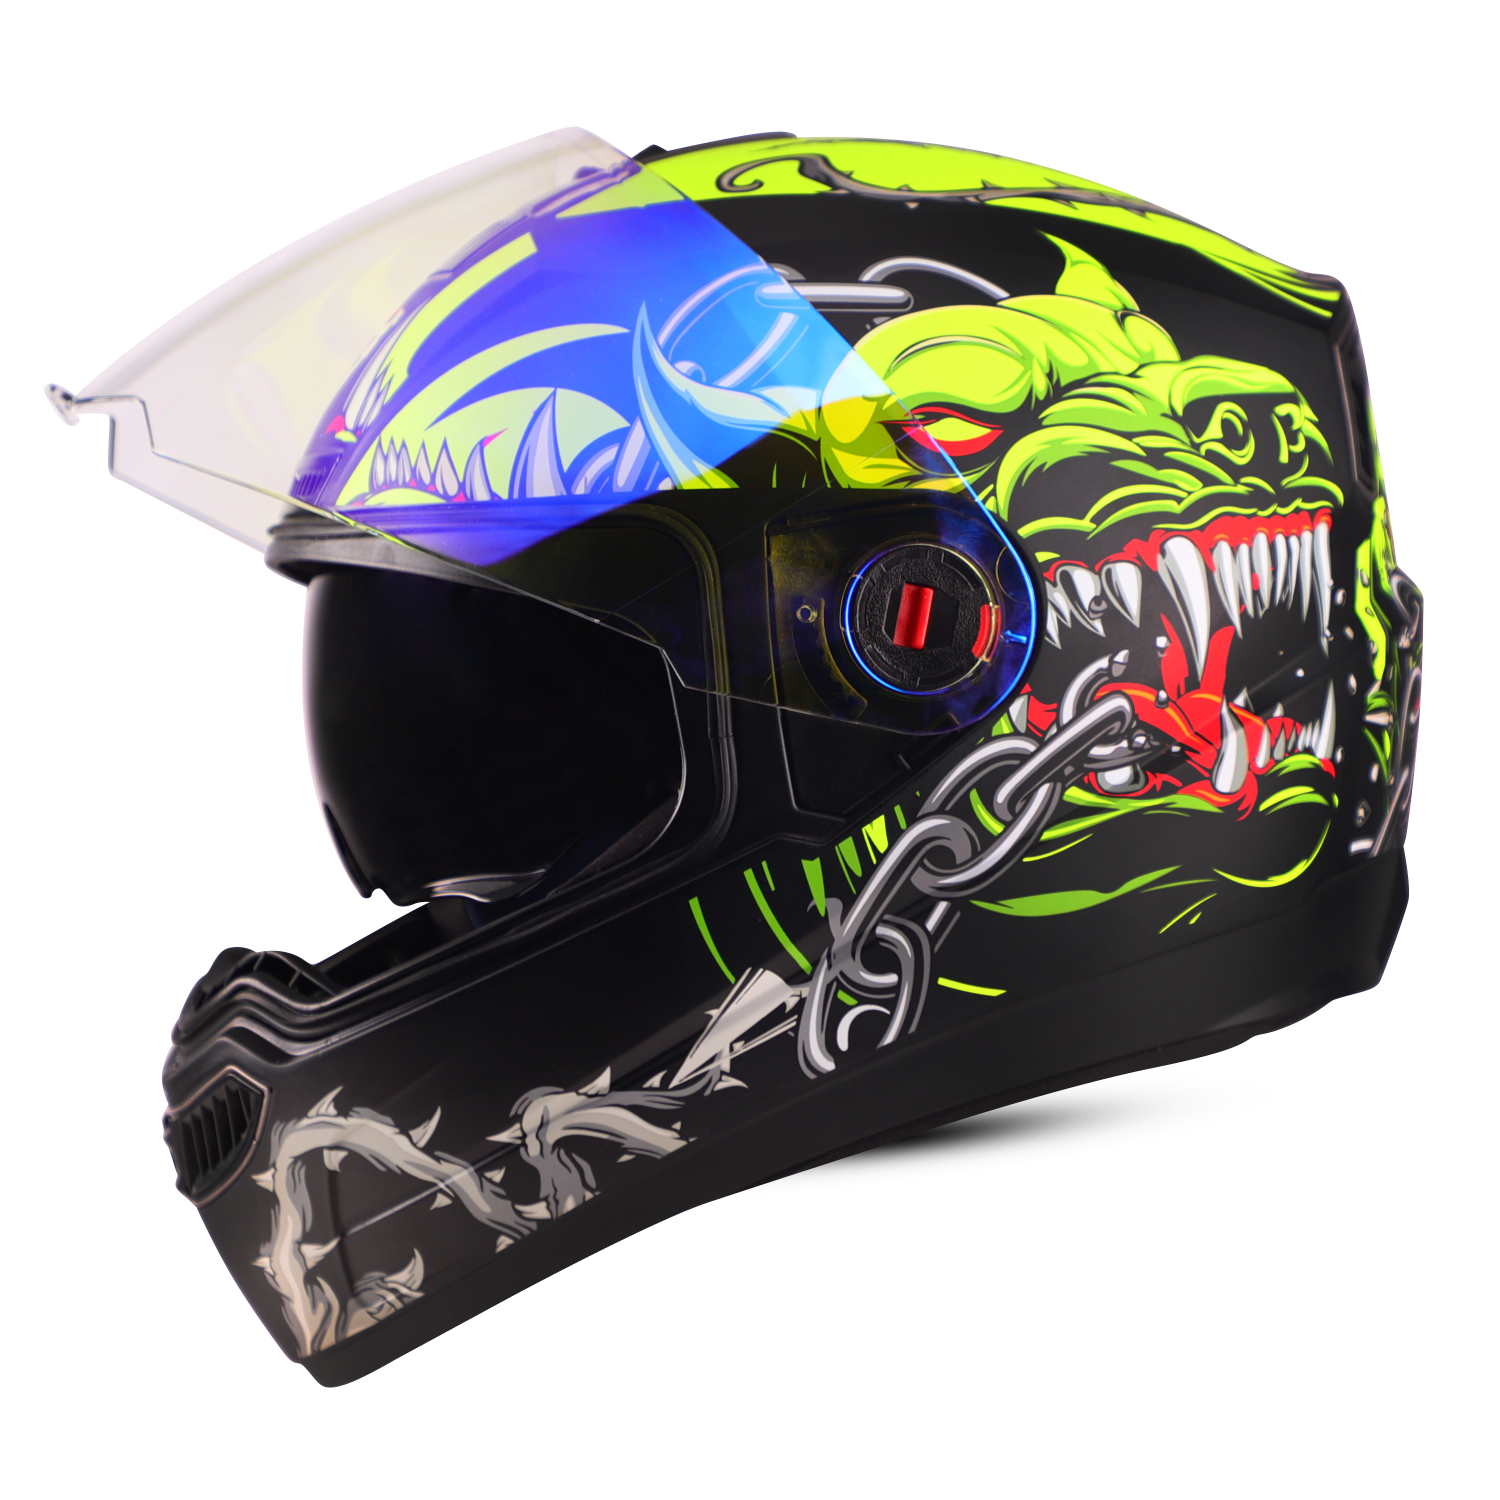 Steelbird SBA-1 Angry Dog ISI Certified Full Face Graphic Helmet for Men and Women with Inner Smoke Sun Shield (Glossy Black Neon with Night Vision Blue Visor)